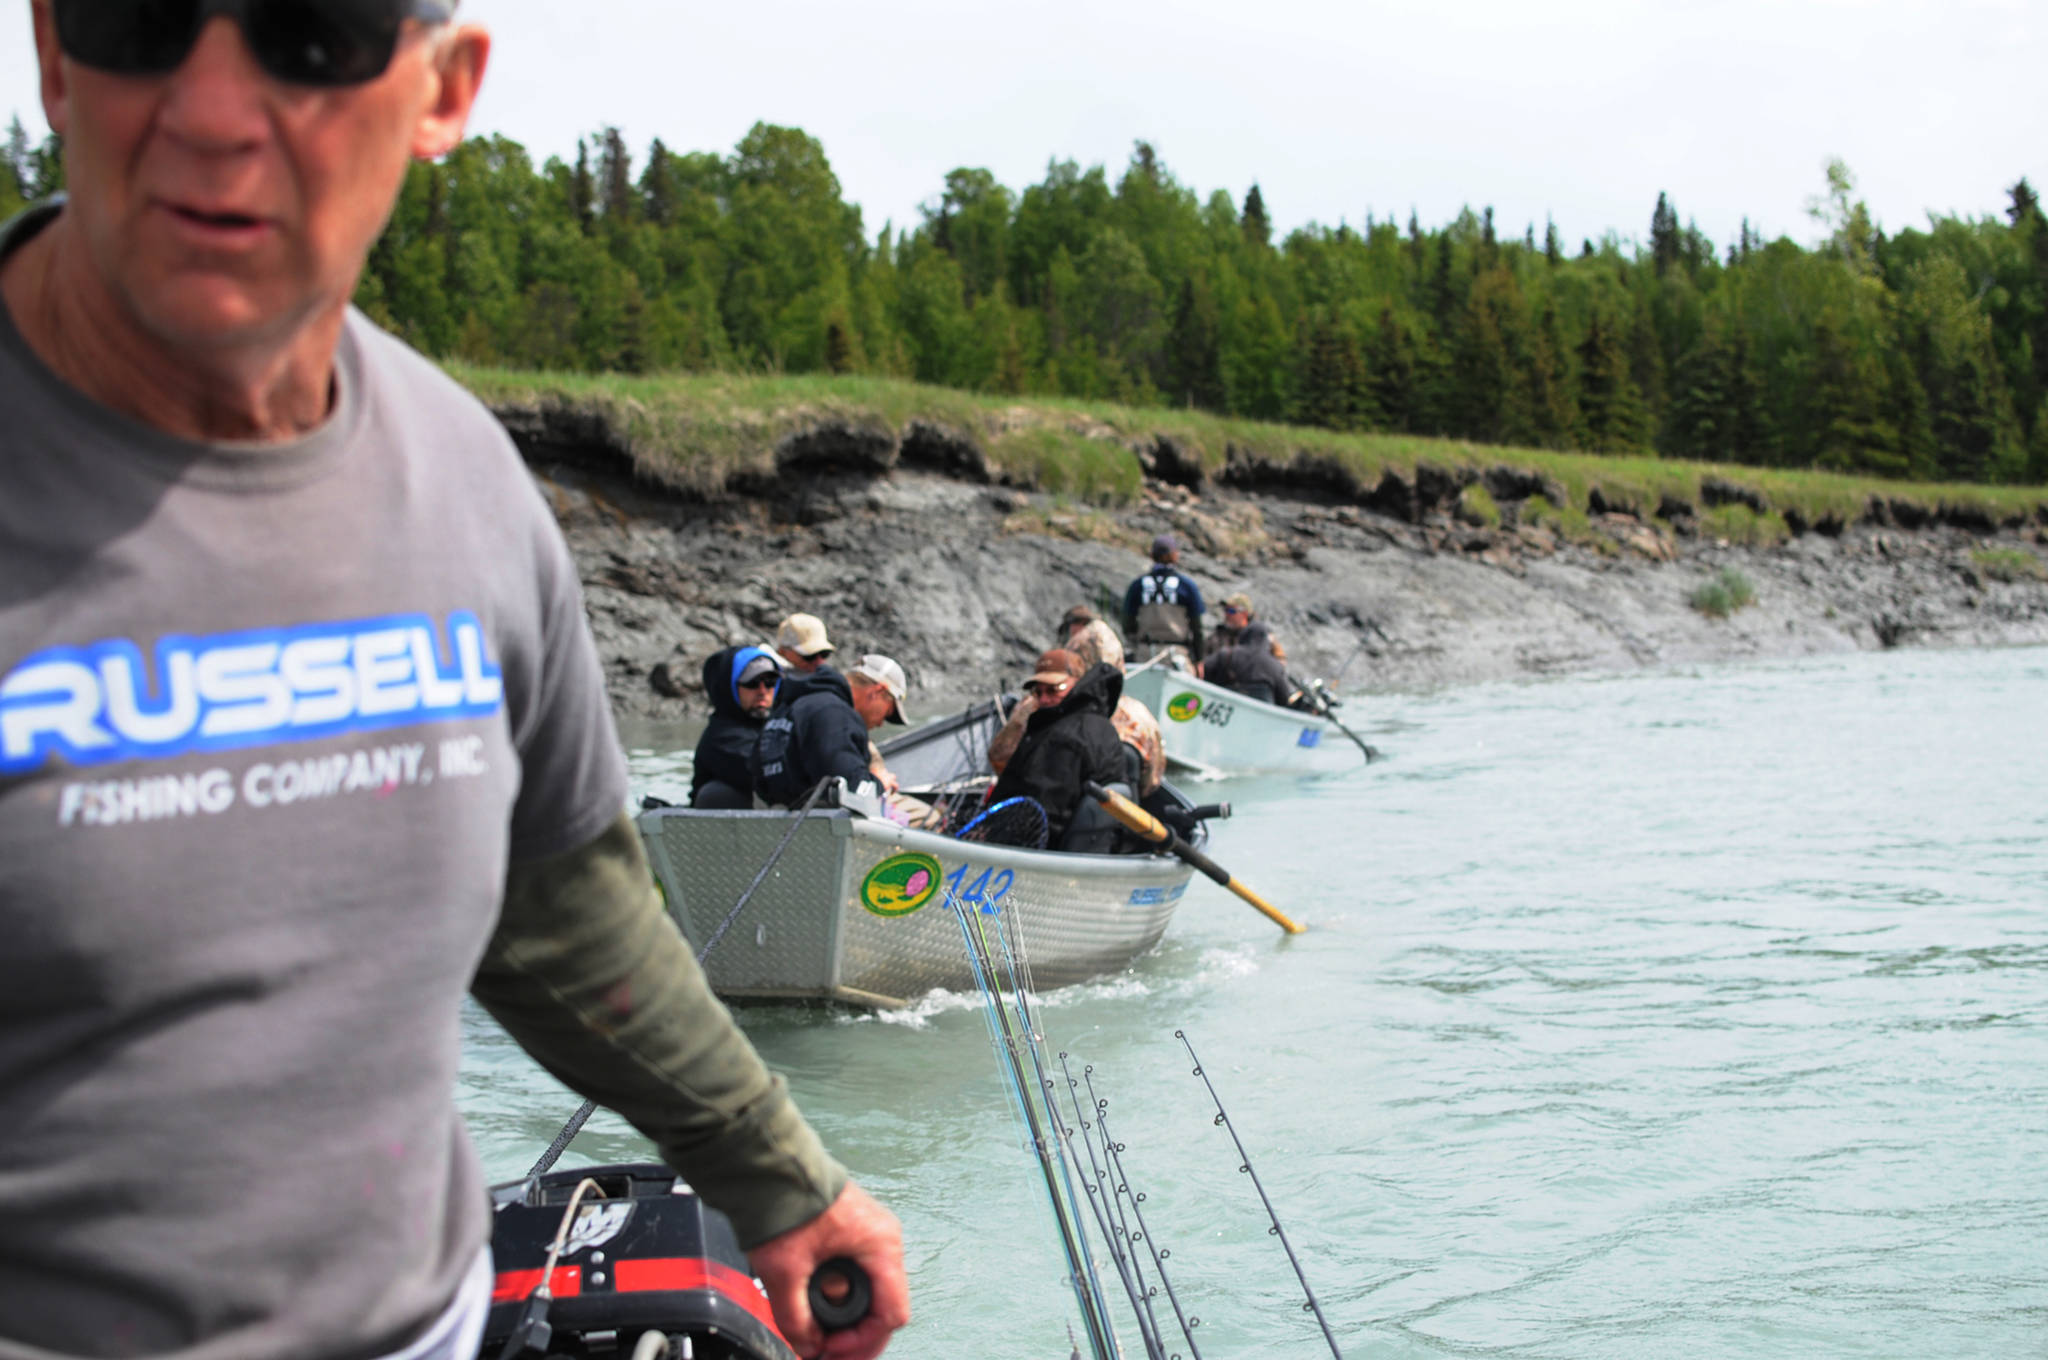 Bill Russell, a fishing guide with Russell Fishing Company, tows two boats full of clients down the Kasilof River toward the boat retrieval system at the Kasilof River Lodge and Cabins on Monday, June 19, 2017 in Kasilof, Alaska. Motors are prohibited on the Kasilof River above a marker at approximately river mile 3, and are limited to 10 horsepower below that. Once a motor goes in the water, guided clients have to draw up their lines and be done with fishing for the day as well. With plans for at state takeout facility at approximately river mile 3.75 stalled, guides have only one option for taking out of the lower Kasilof River, which can sometimes lead to long waits. ((Photo by Elizabeth Earl/Peninsula Clarion)